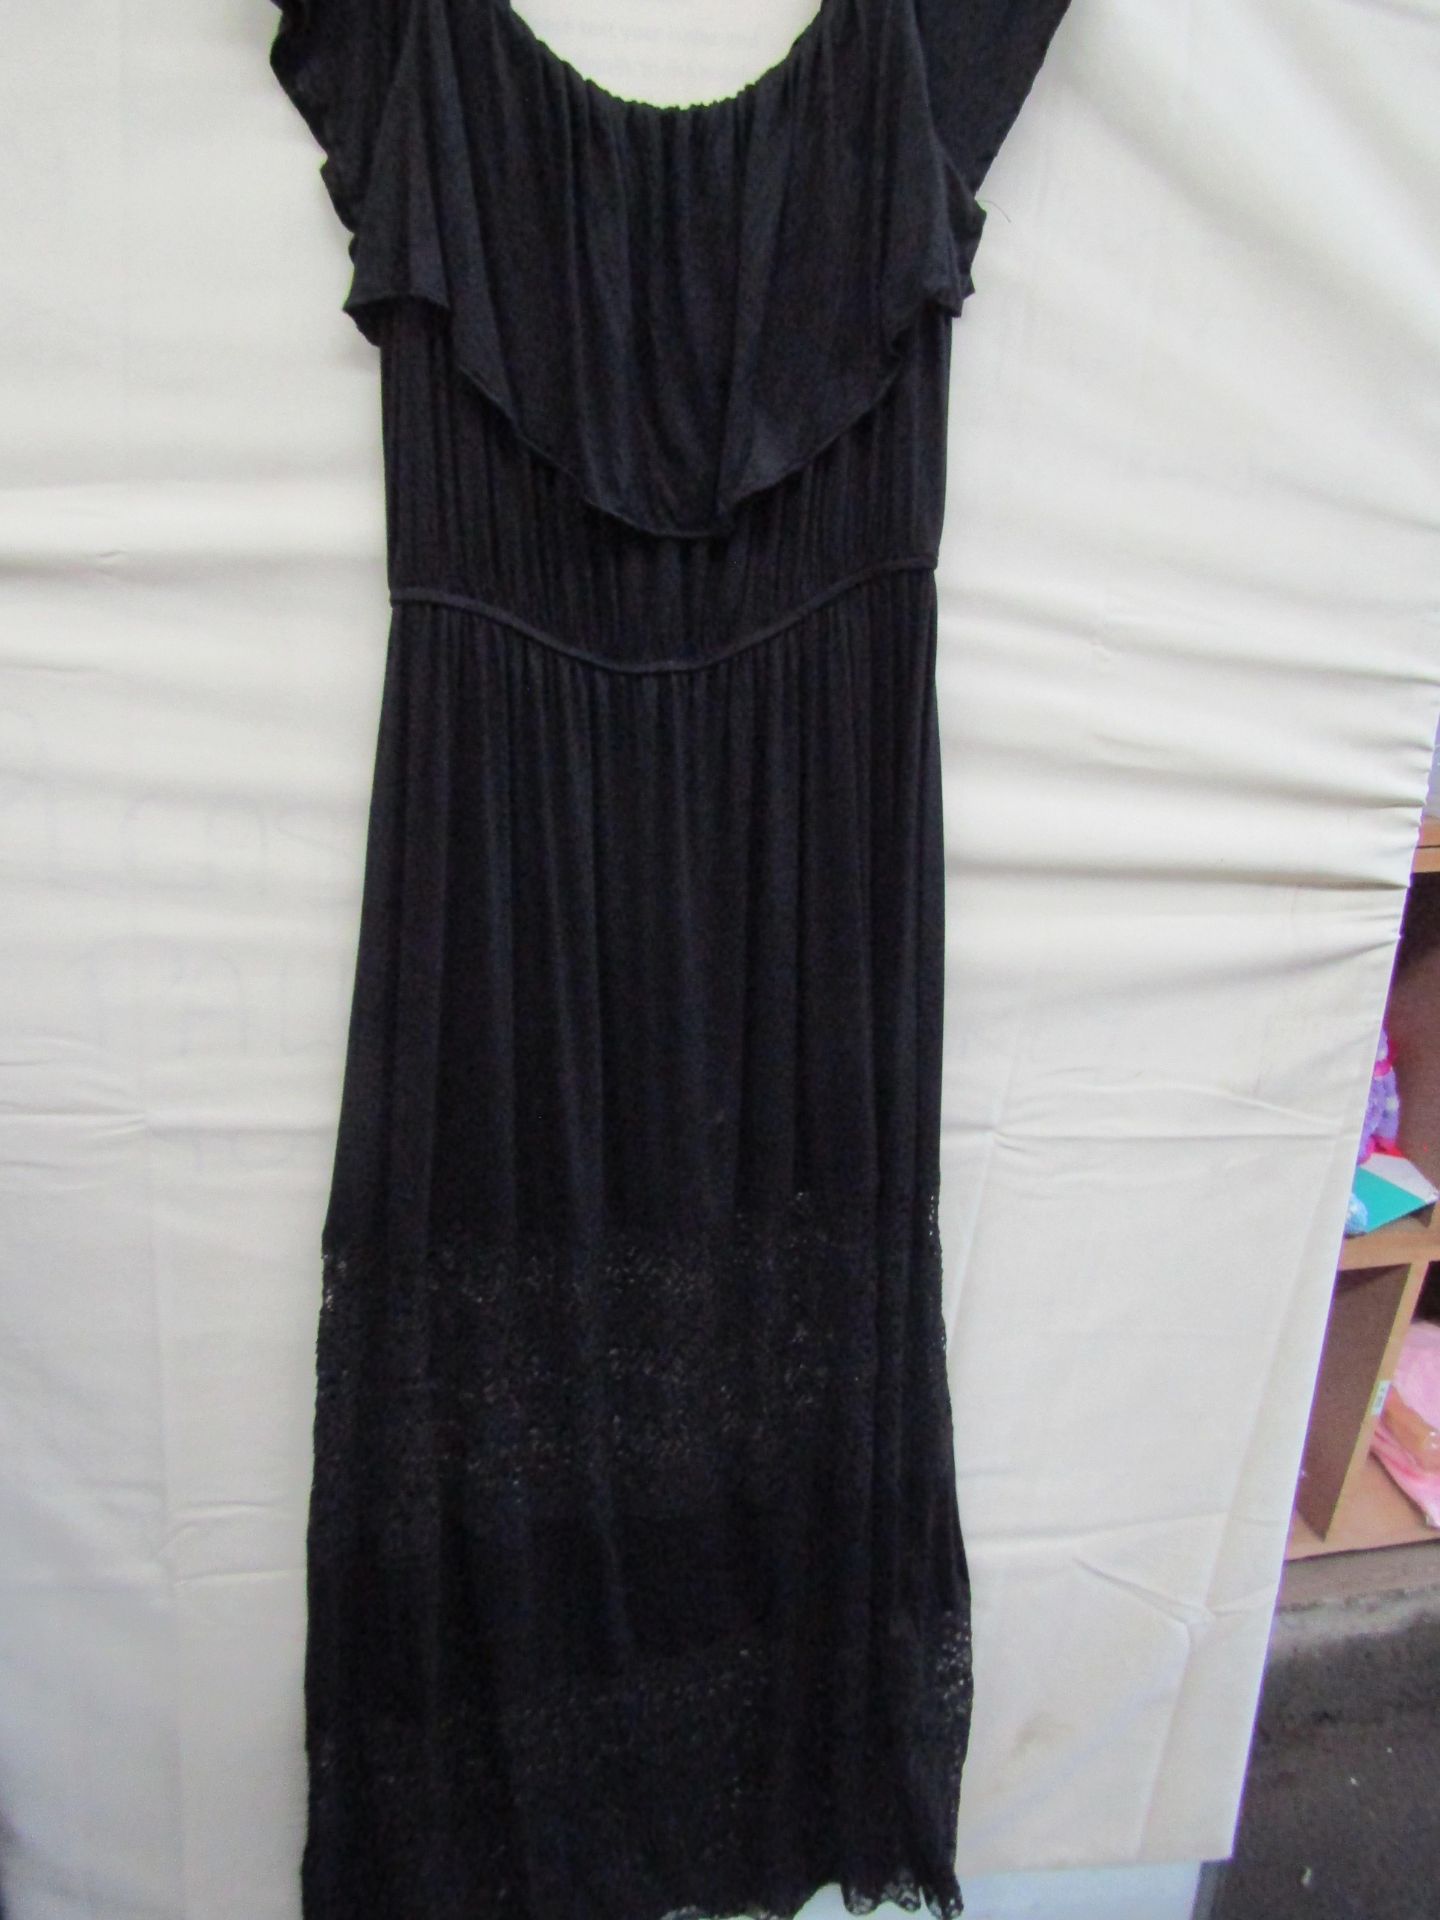 Lascana Long Black Dress With Lace Design Panels Size 14 May Have Been Worn Good Condition